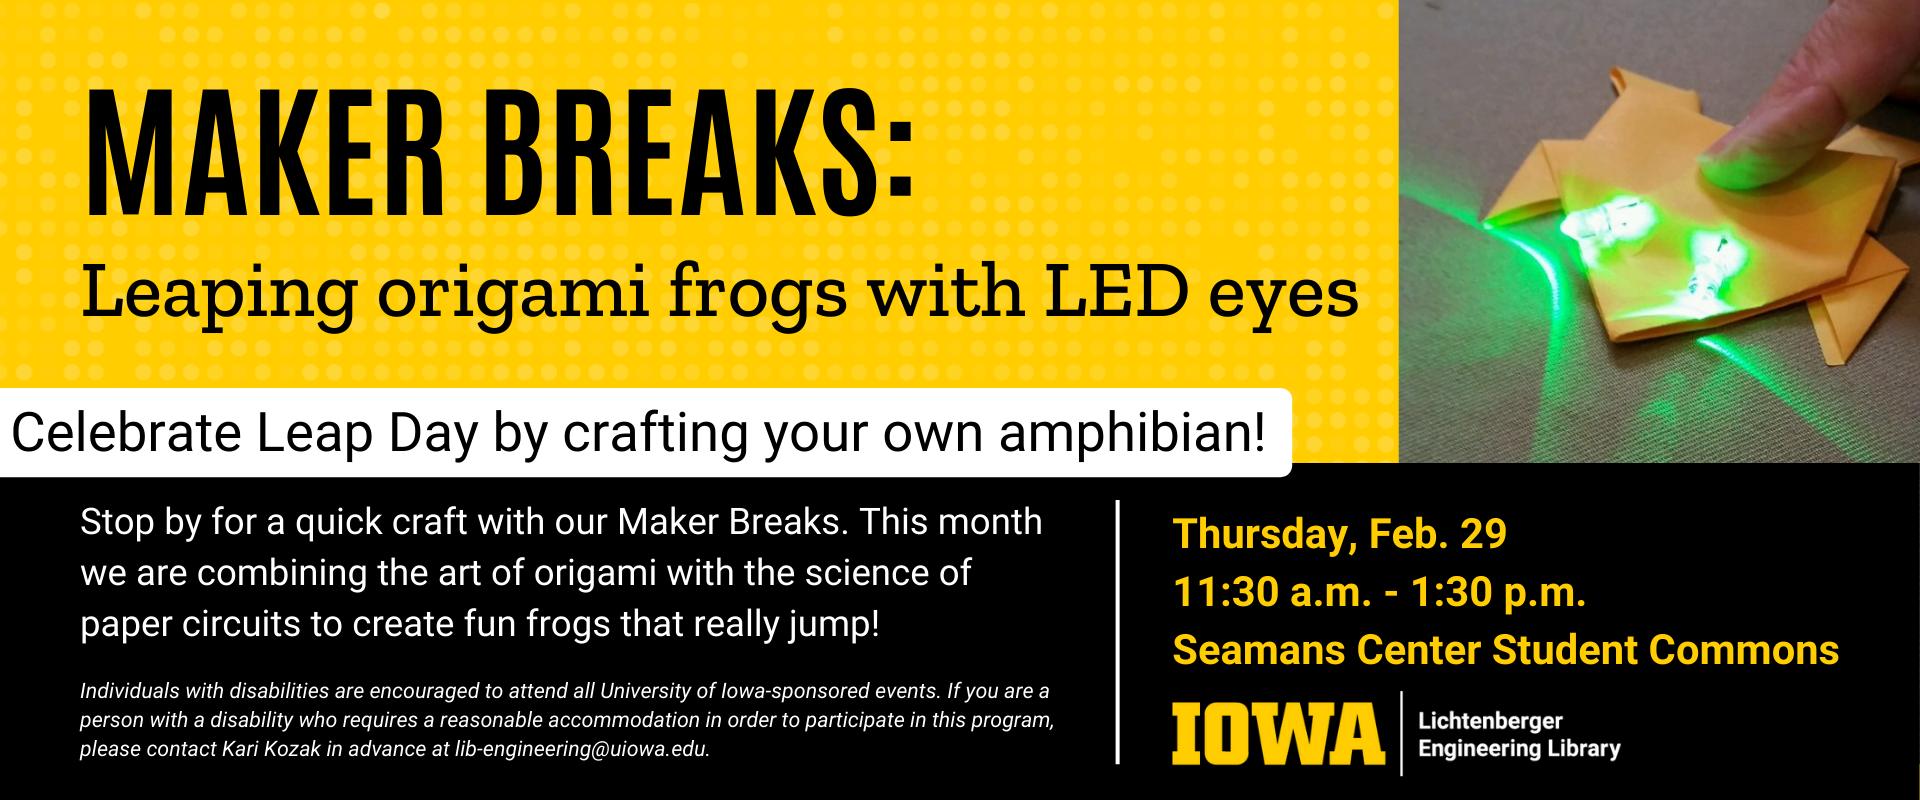 Maker Breaks: Leaping Origami Frogs with LED Eyes